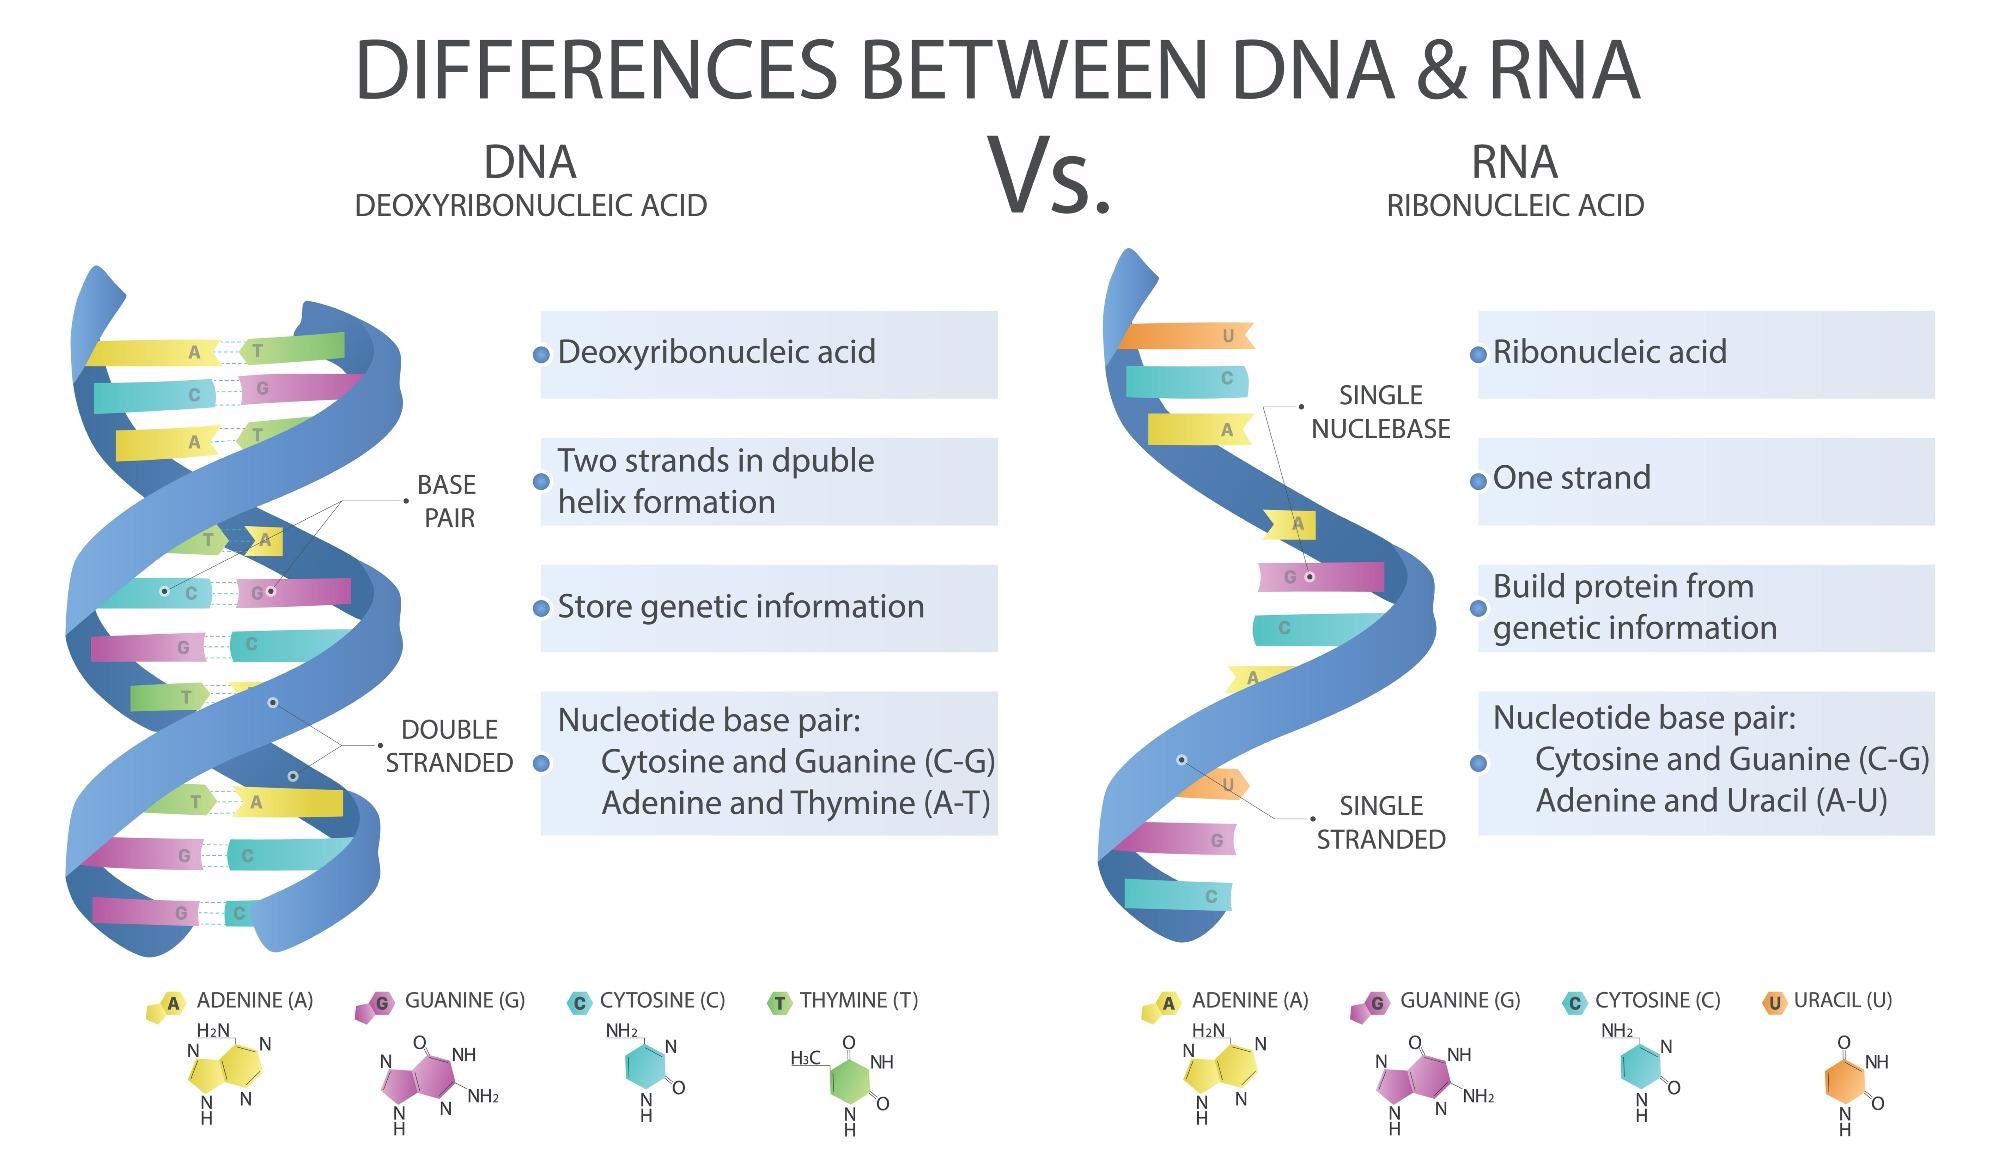 Difference between DNA and RNA. Image Credit: DiBtv / Shutterstock